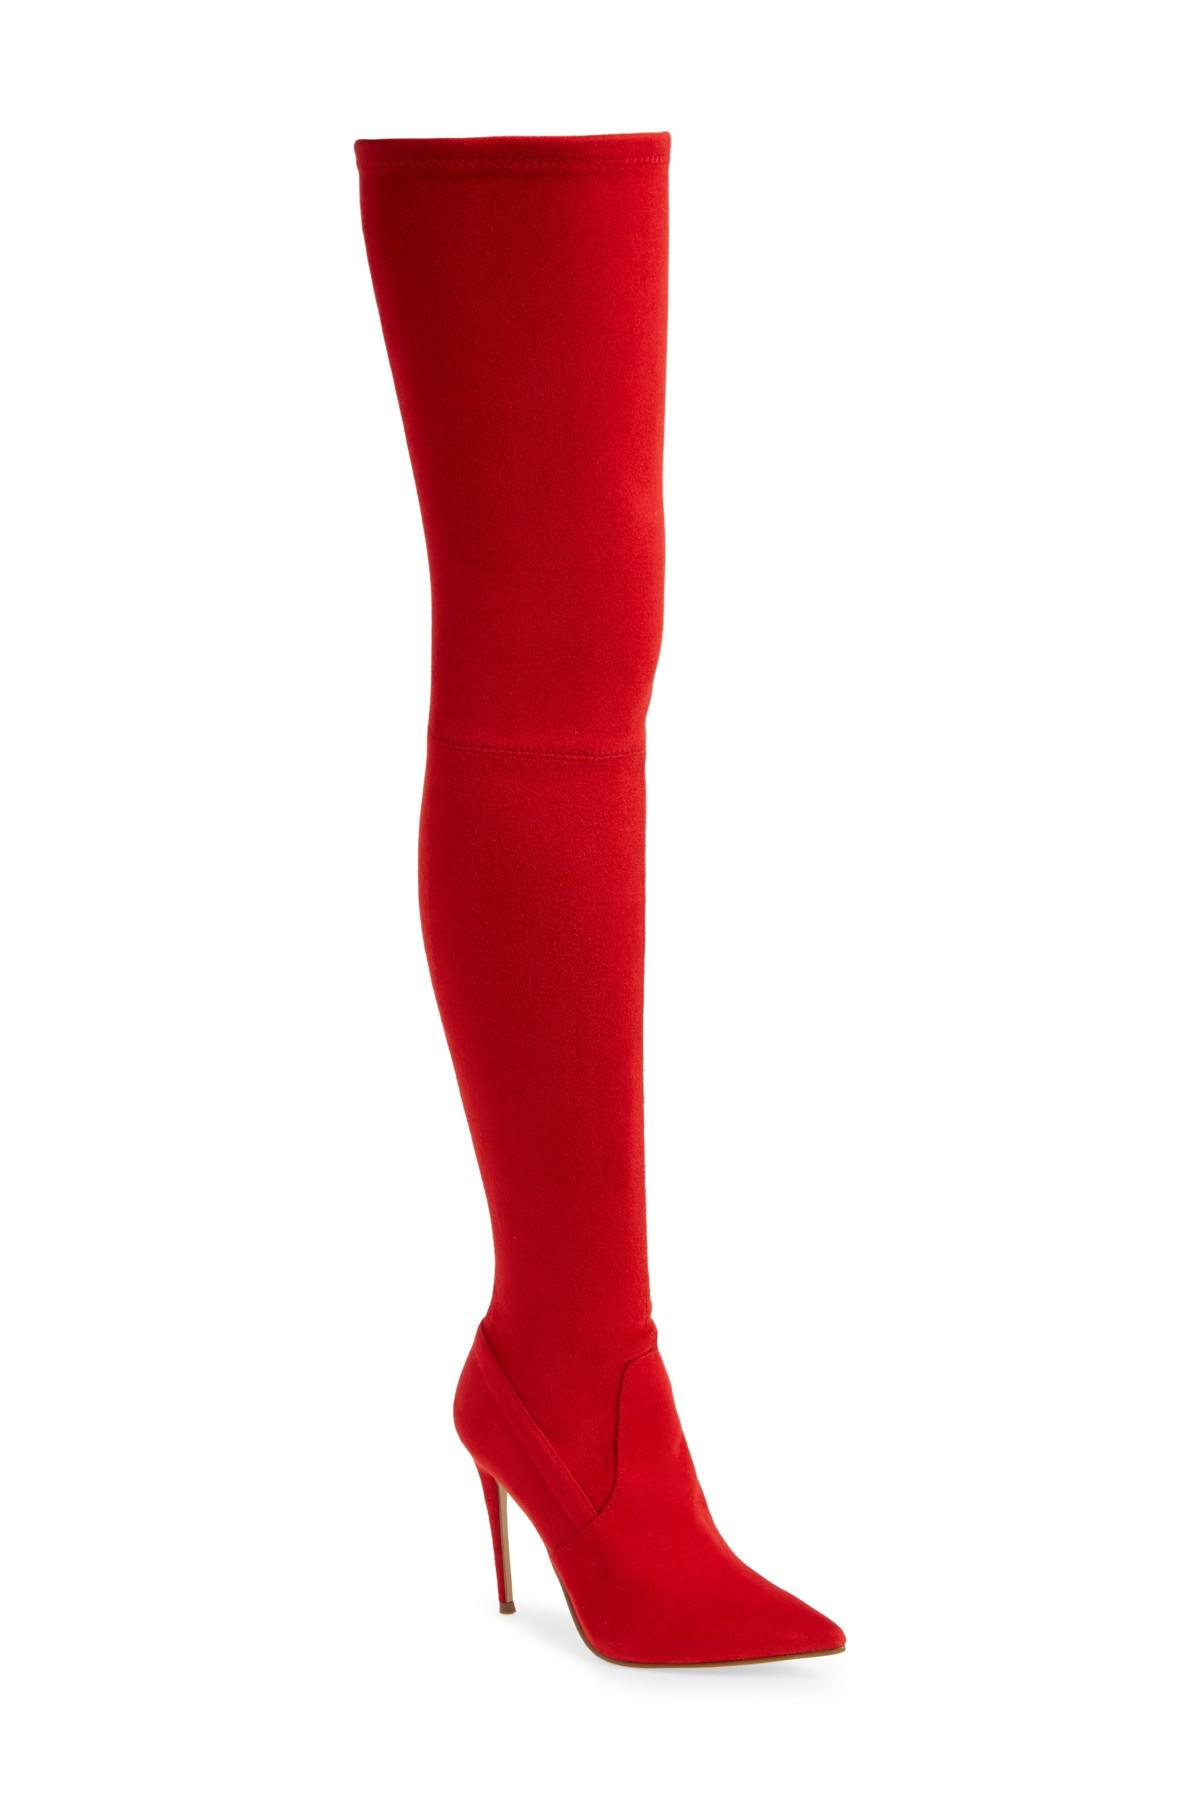 Lyst - Steve Madden Dominique Thigh High Boot in Red